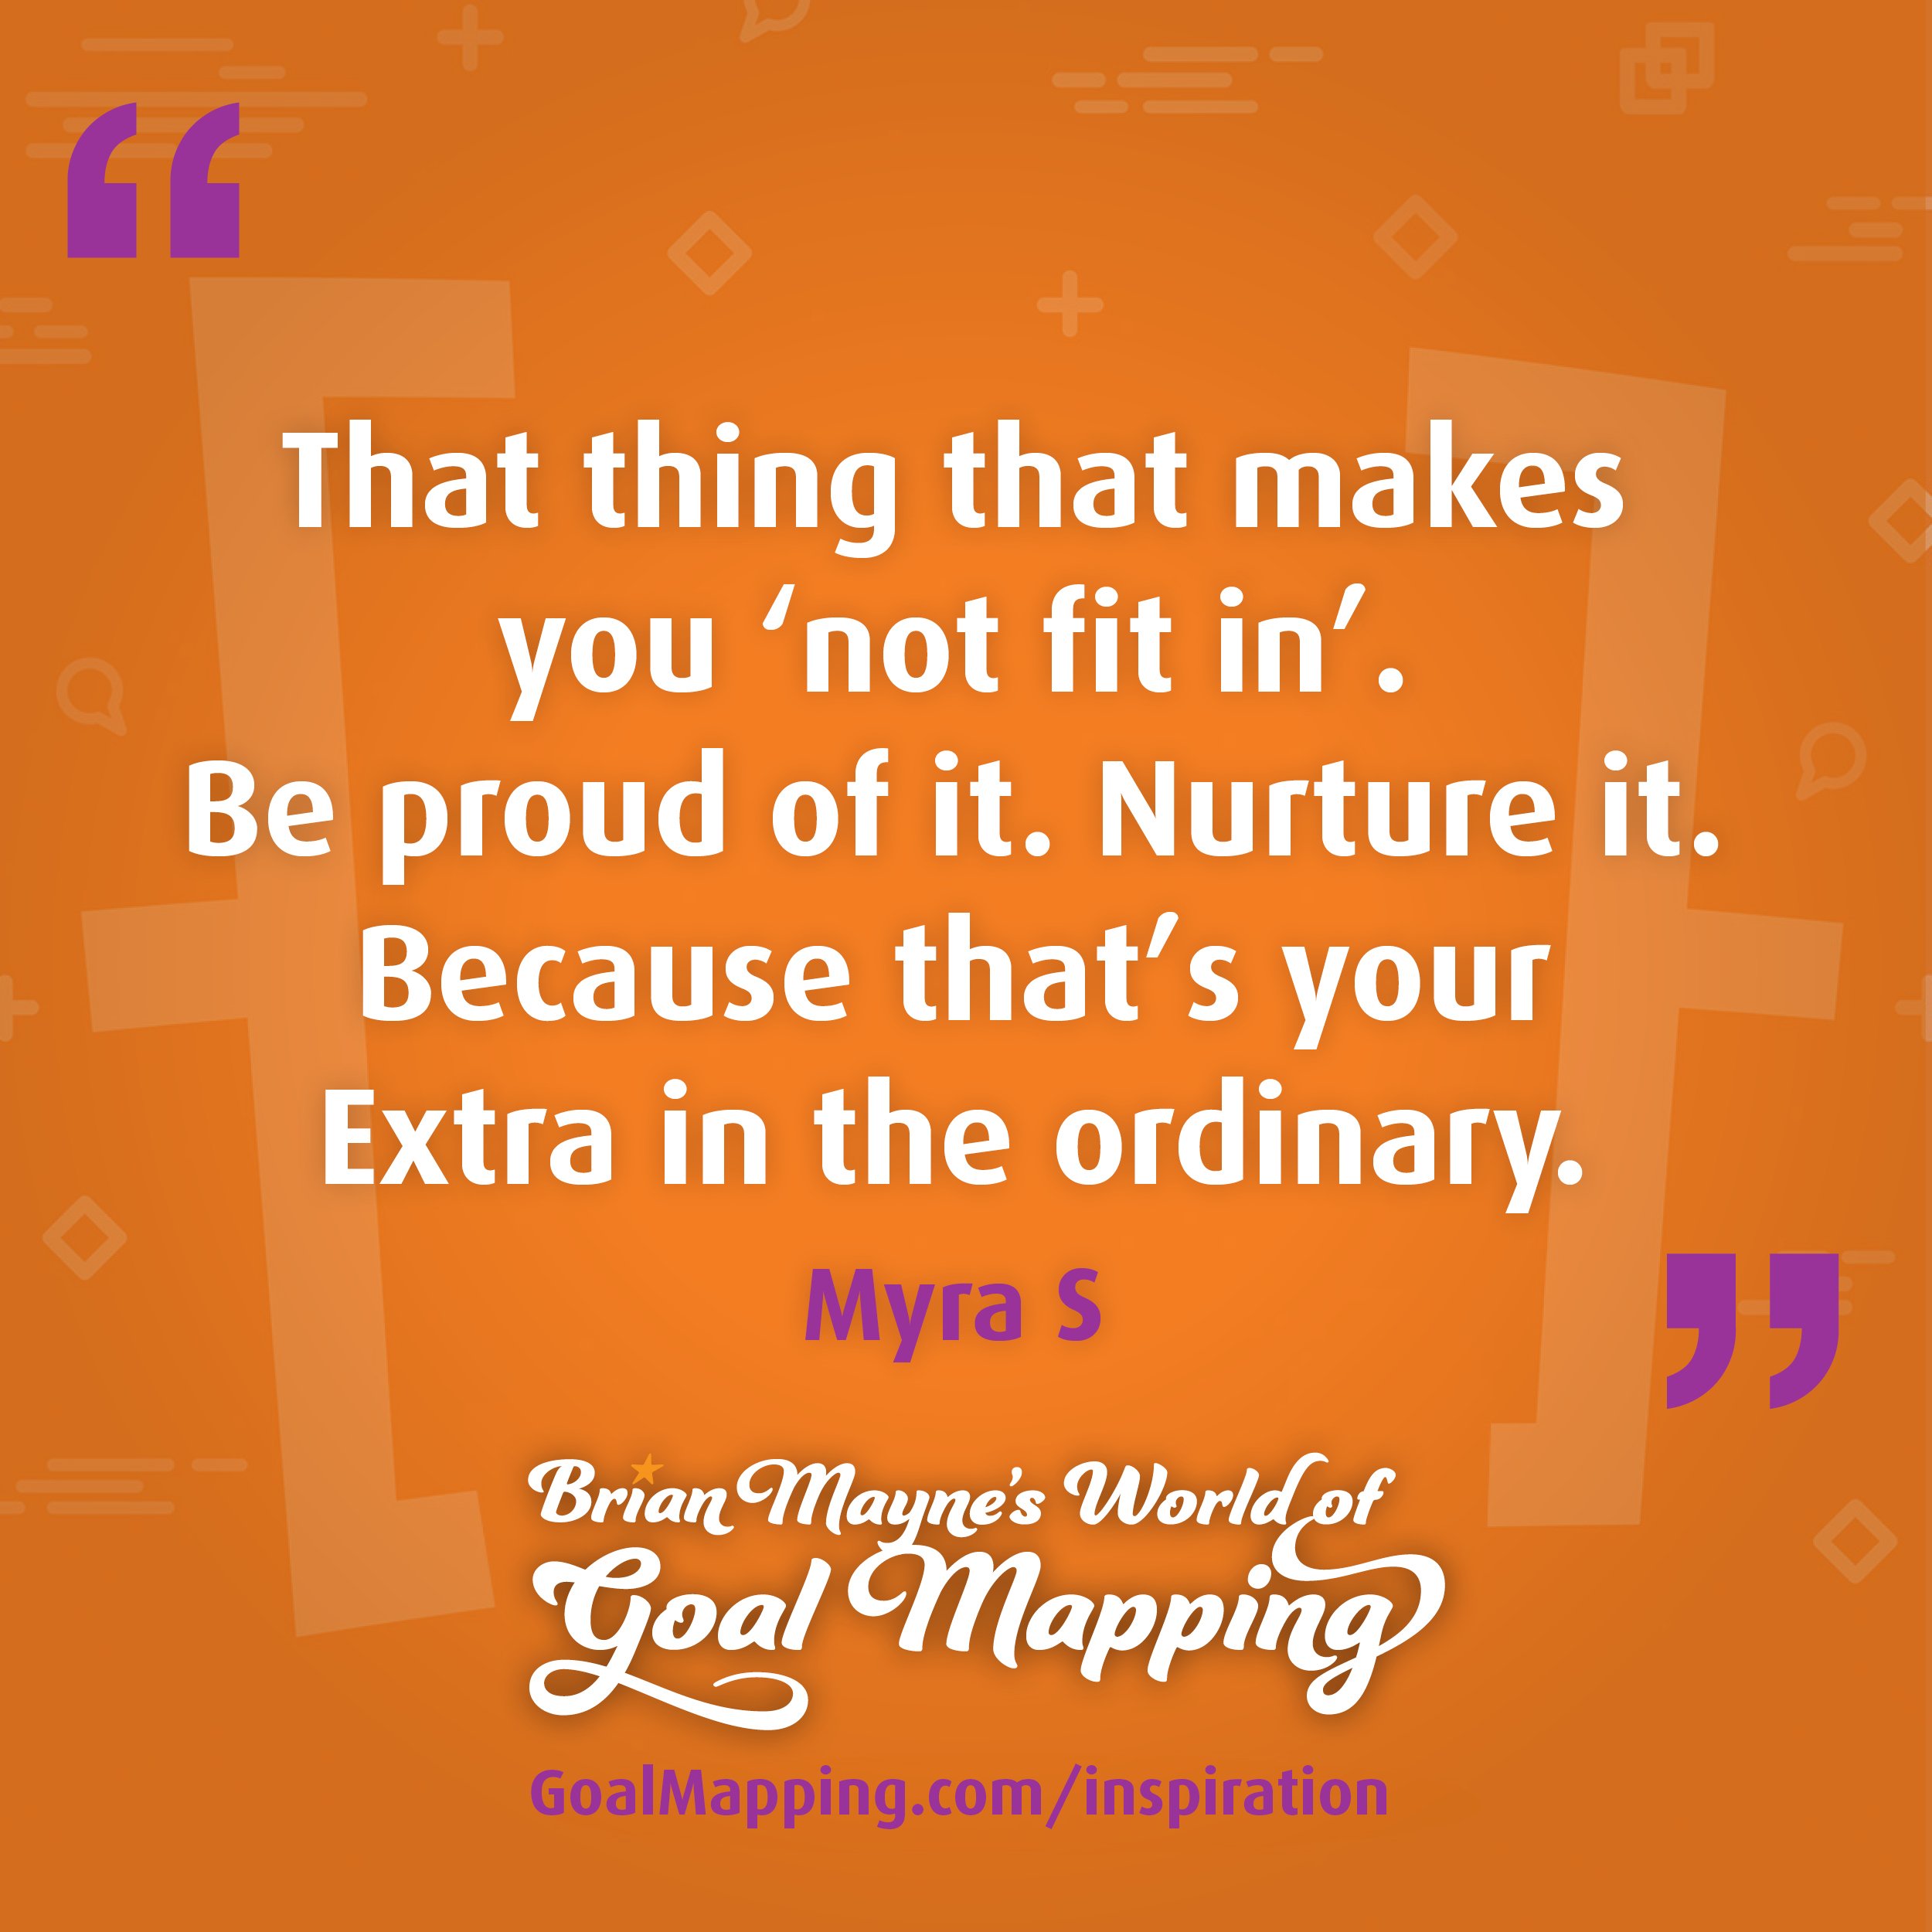 "That thing that makes you 'not fit in'. Be proud of it. Nurture it. Because that’s your Extra in the ordinary." Myra S